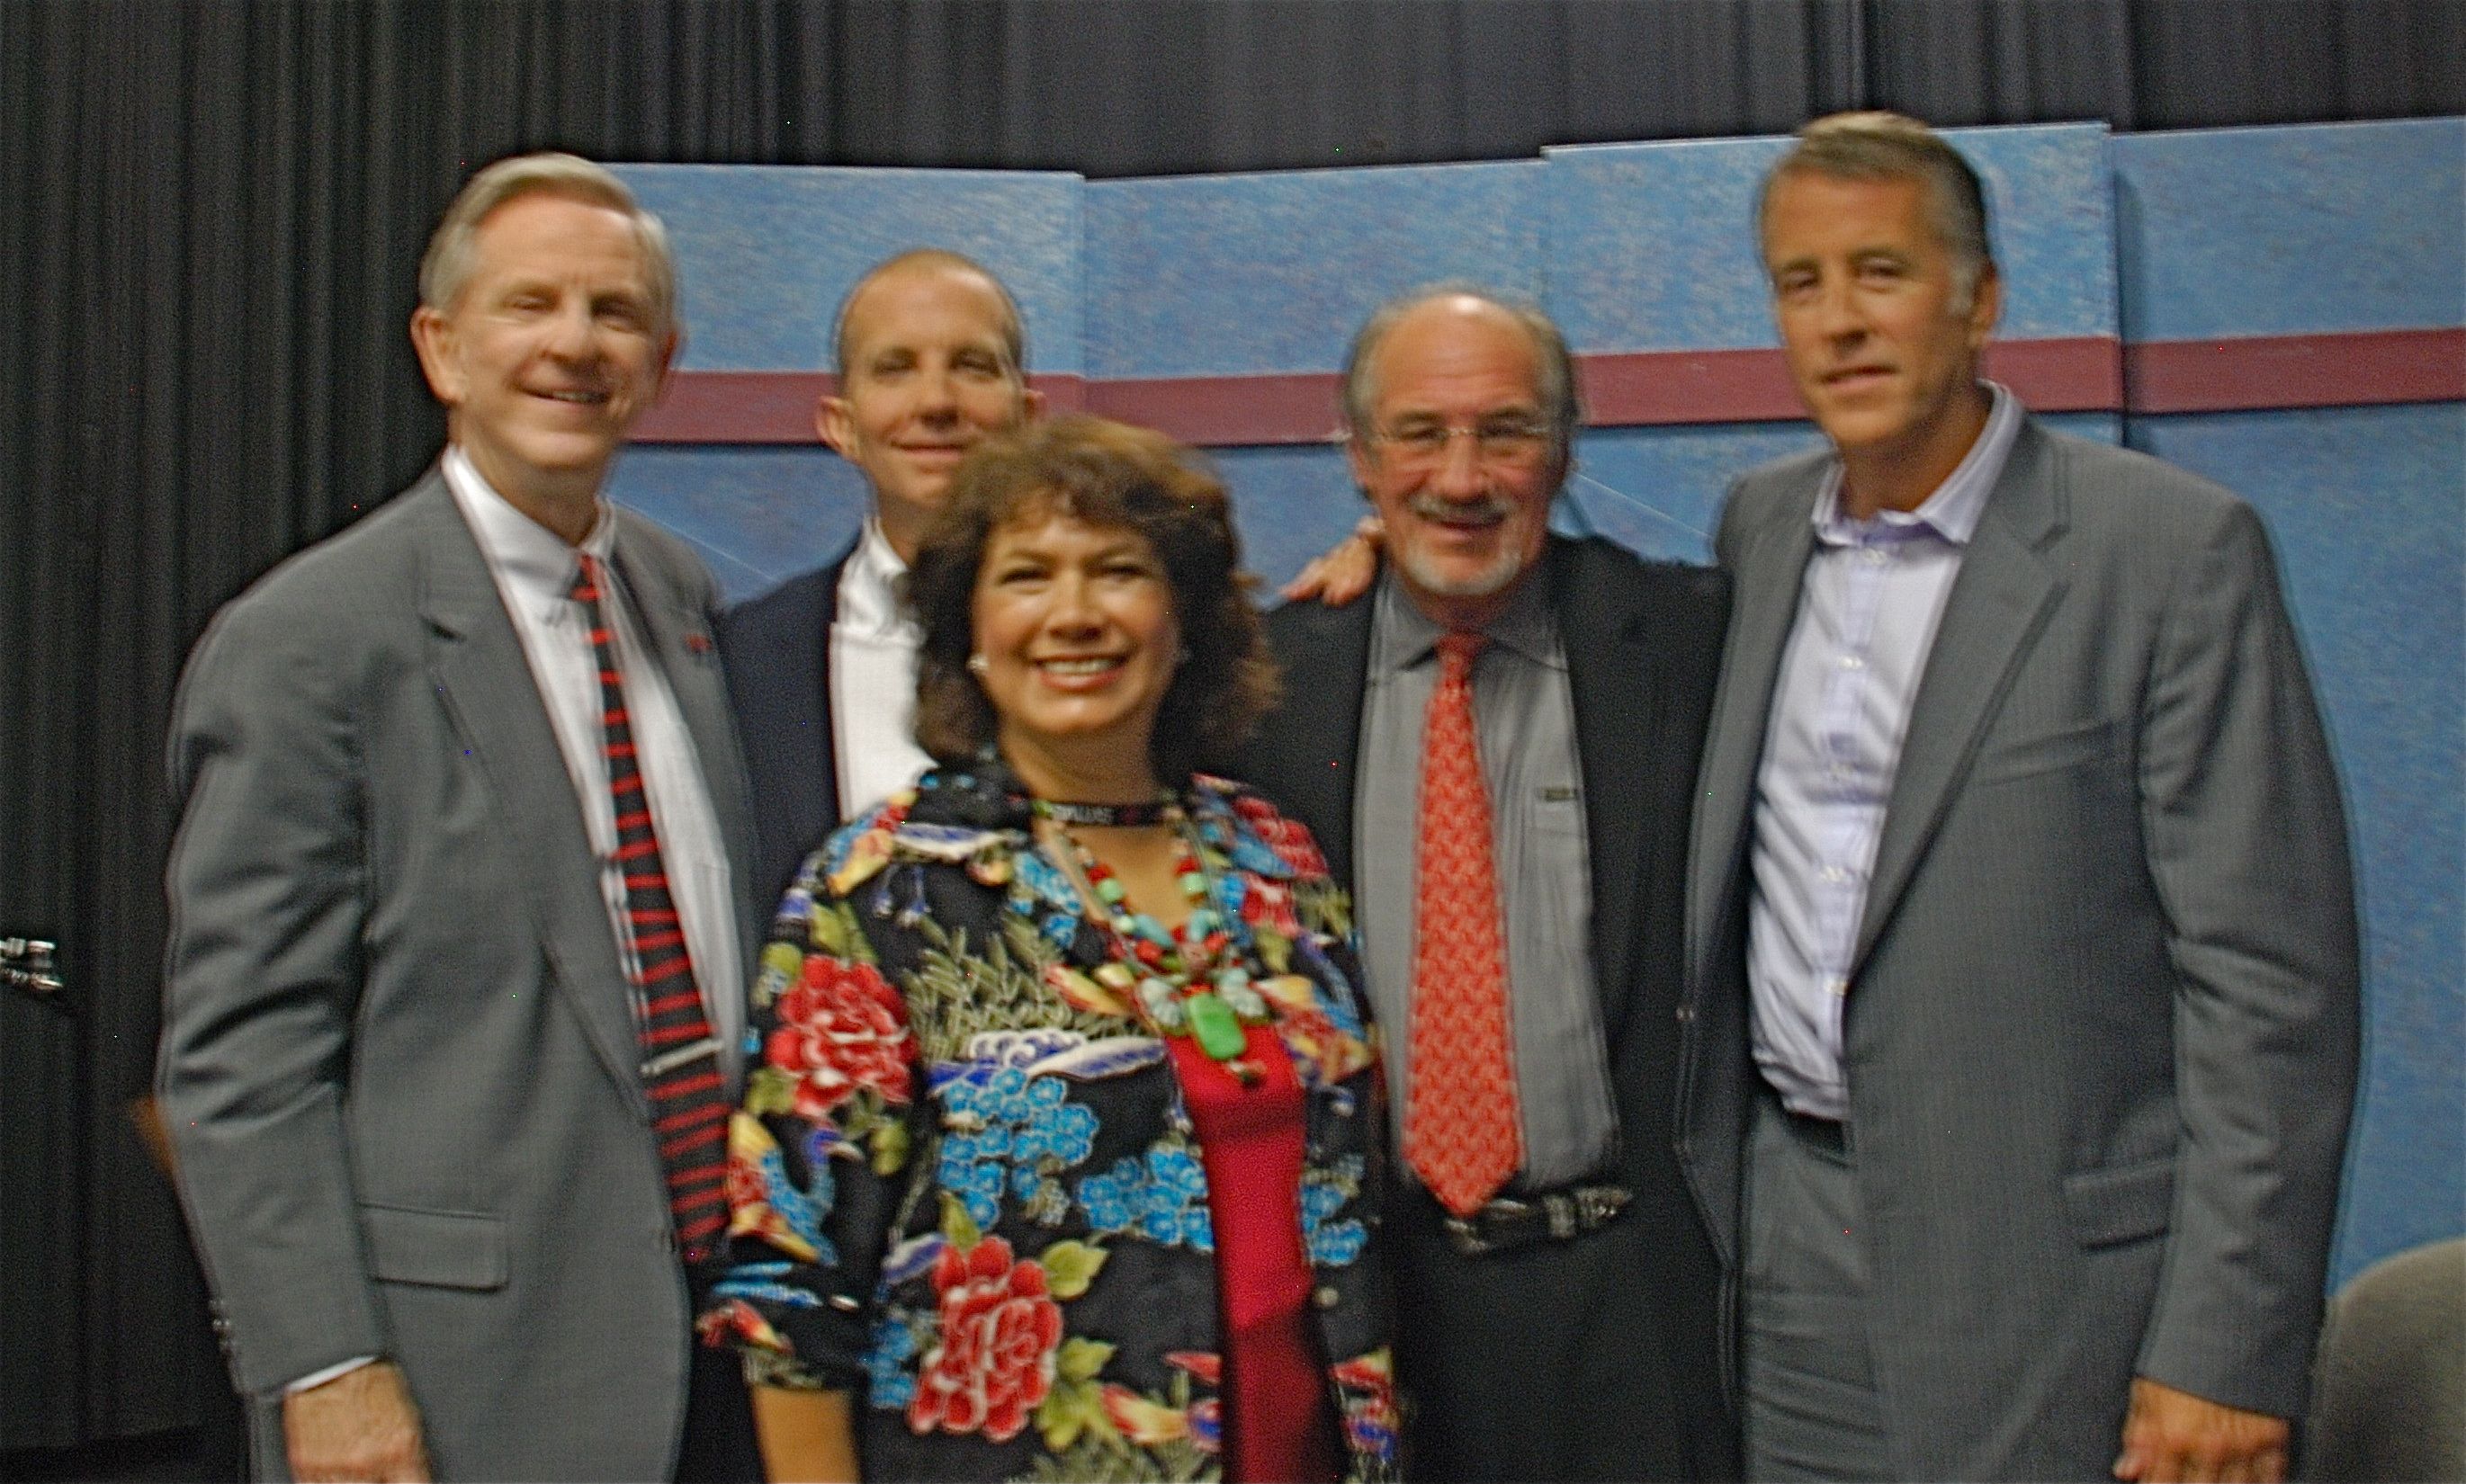 Dennis McCuistion, Niki McCuistion, Christopher Lawford Kennedy, Kevin Gilliland and Bill Teuteburg - Addiction Causes